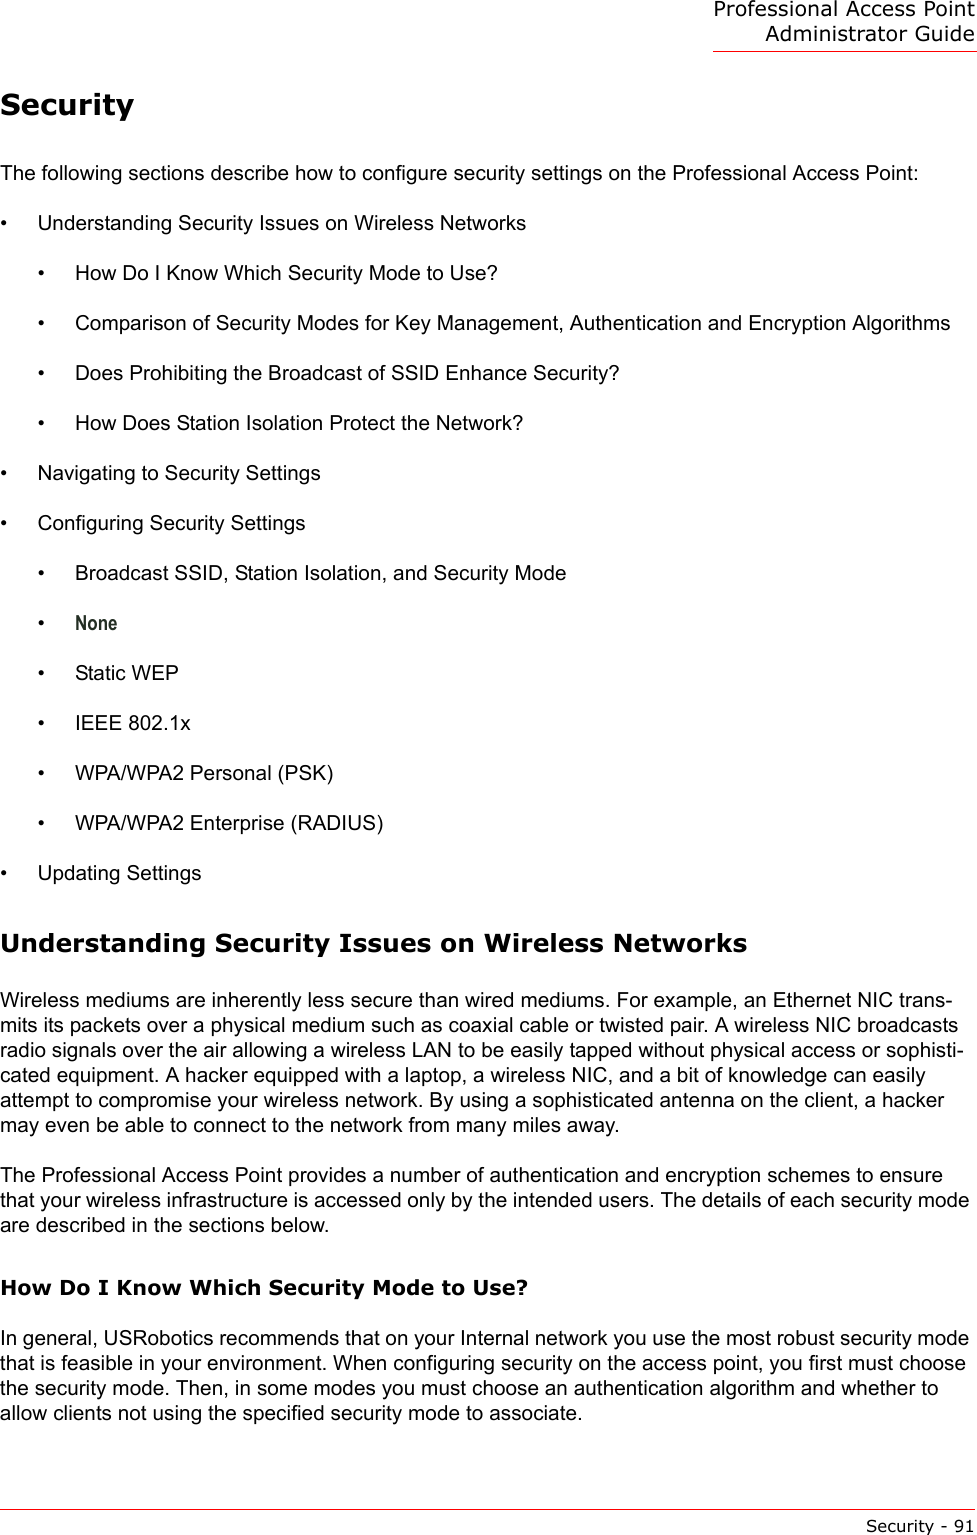 Professional Access Point Administrator GuideSecurity - 91SecurityThe following sections describe how to configure security settings on the Professional Access Point:•Understanding Security Issues on Wireless Networks•How Do I Know Which Security Mode to Use?•Comparison of Security Modes for Key Management, Authentication and Encryption Algorithms•Does Prohibiting the Broadcast of SSID Enhance Security?•How Does Station Isolation Protect the Network?•Navigating to Security Settings•Configuring Security Settings•Broadcast SSID, Station Isolation, and Security Mode•None•Static WEP•IEEE 802.1x•WPA/WPA2 Personal (PSK)•WPA/WPA2 Enterprise (RADIUS)•Updating SettingsUnderstanding Security Issues on Wireless Networks Wireless mediums are inherently less secure than wired mediums. For example, an Ethernet NIC trans-mits its packets over a physical medium such as coaxial cable or twisted pair. A wireless NIC broadcasts radio signals over the air allowing a wireless LAN to be easily tapped without physical access or sophisti-cated equipment. A hacker equipped with a laptop, a wireless NIC, and a bit of knowledge can easily attempt to compromise your wireless network. By using a sophisticated antenna on the client, a hacker may even be able to connect to the network from many miles away.The Professional Access Point provides a number of authentication and encryption schemes to ensure that your wireless infrastructure is accessed only by the intended users. The details of each security mode are described in the sections below.How Do I Know Which Security Mode to Use?In general, USRobotics recommends that on your Internal network you use the most robust security mode that is feasible in your environment. When configuring security on the access point, you first must choose the security mode. Then, in some modes you must choose an authentication algorithm and whether to allow clients not using the specified security mode to associate.